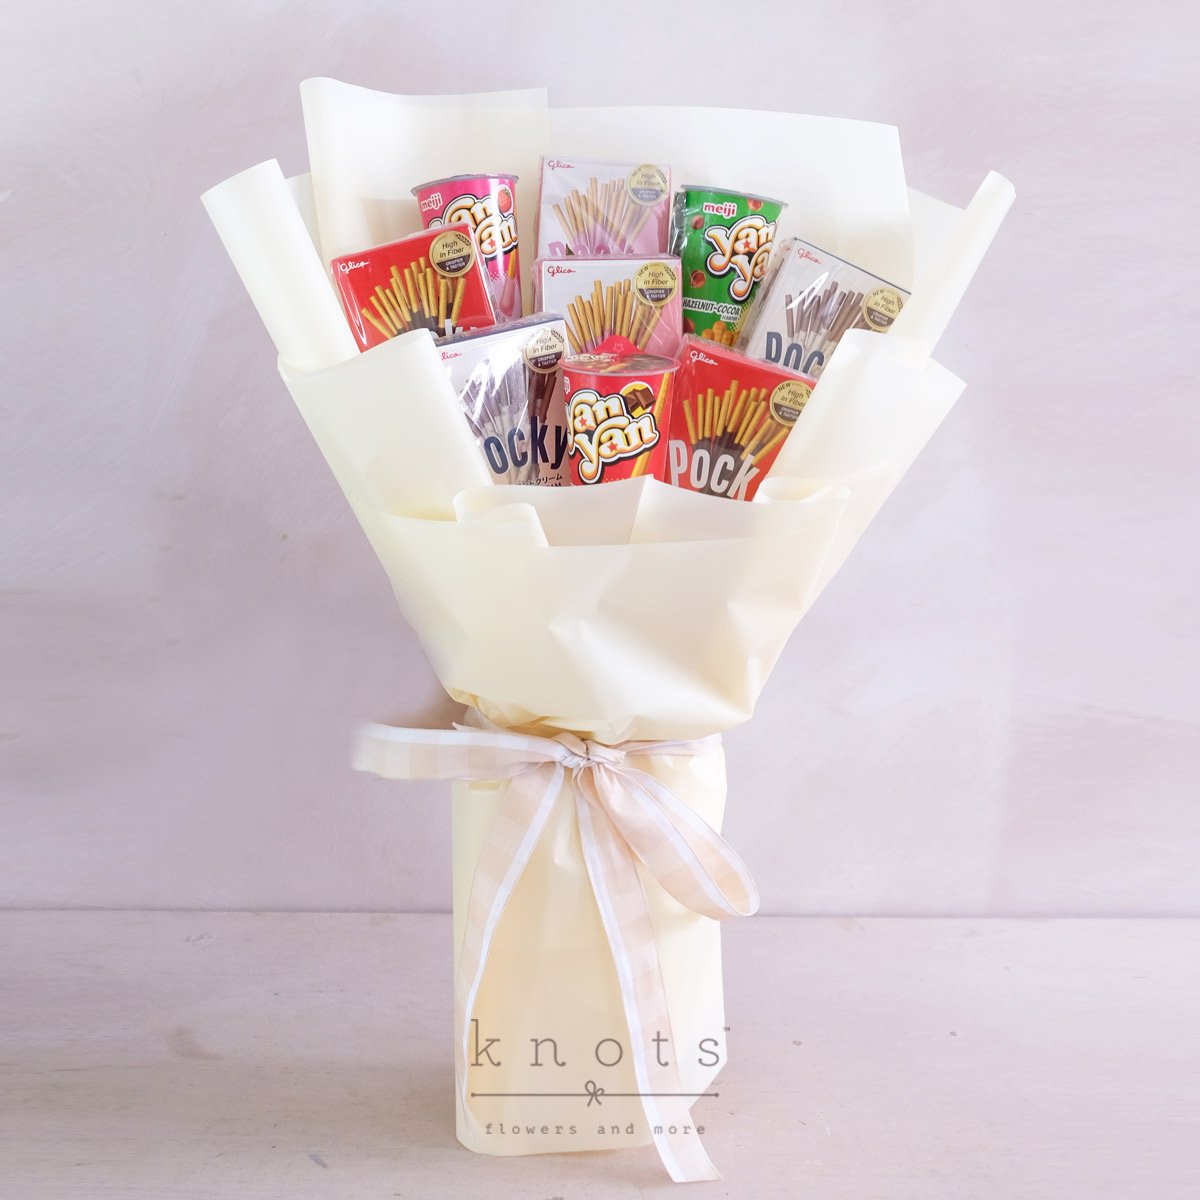 Start with our Sweetness (Assorted Chocolate Bouquet)